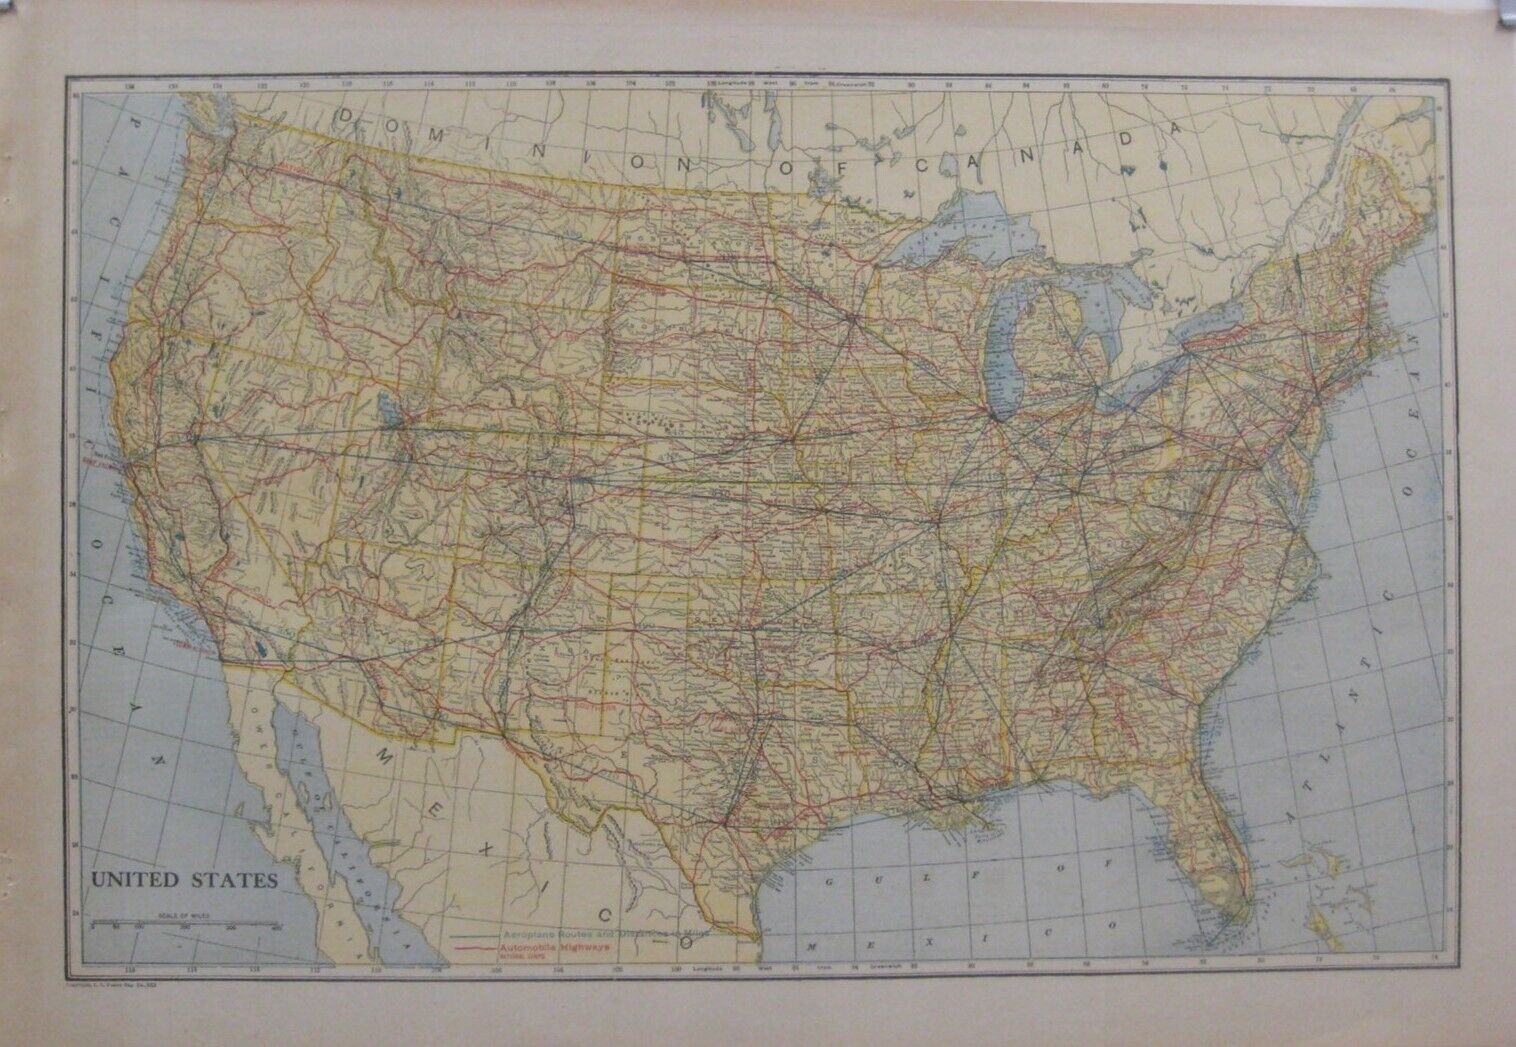 Original 1921 NAMED TRAILS Road Map UNITED STATES Airplane Routes National Camps